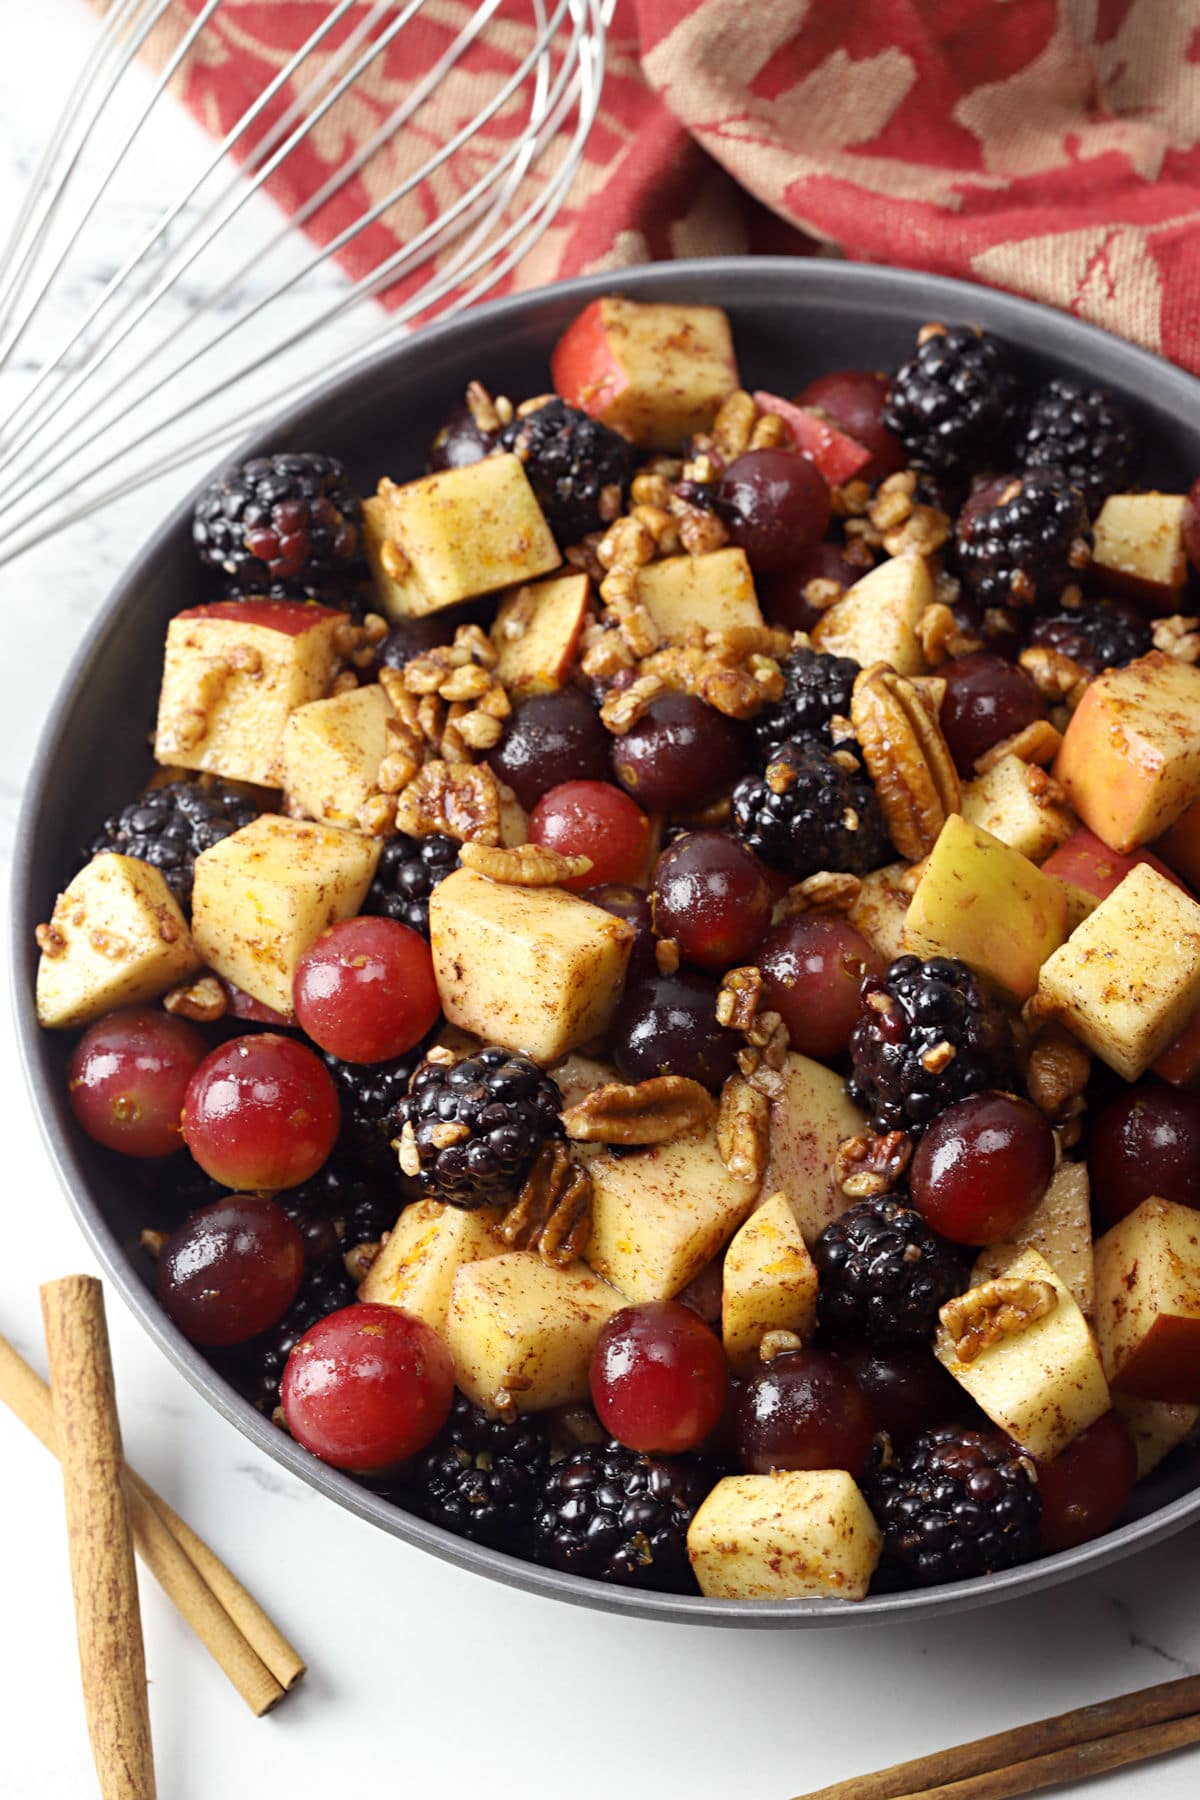 A bowl filled with fruit salad next a red and gold kitchen towel and cinnamon sticks.